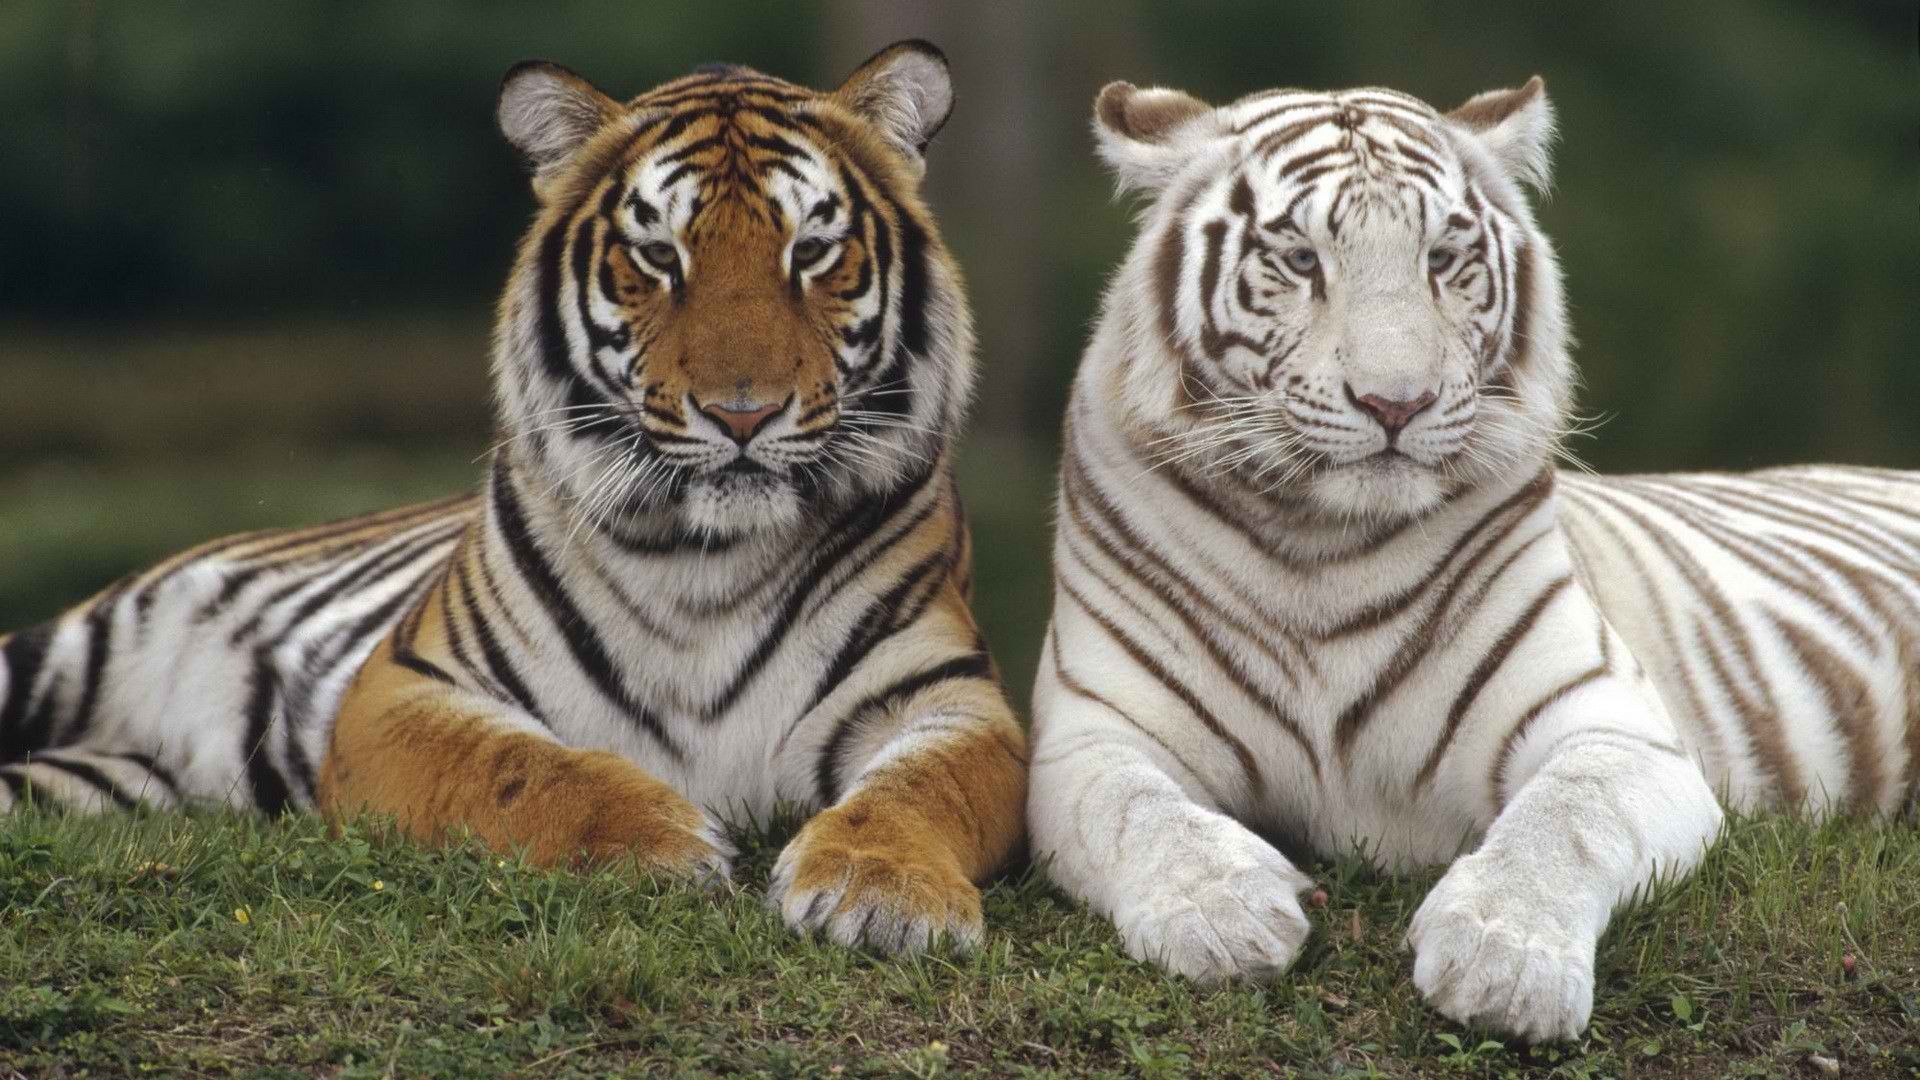 All About Tigers - Widescreen HD Wallpapers